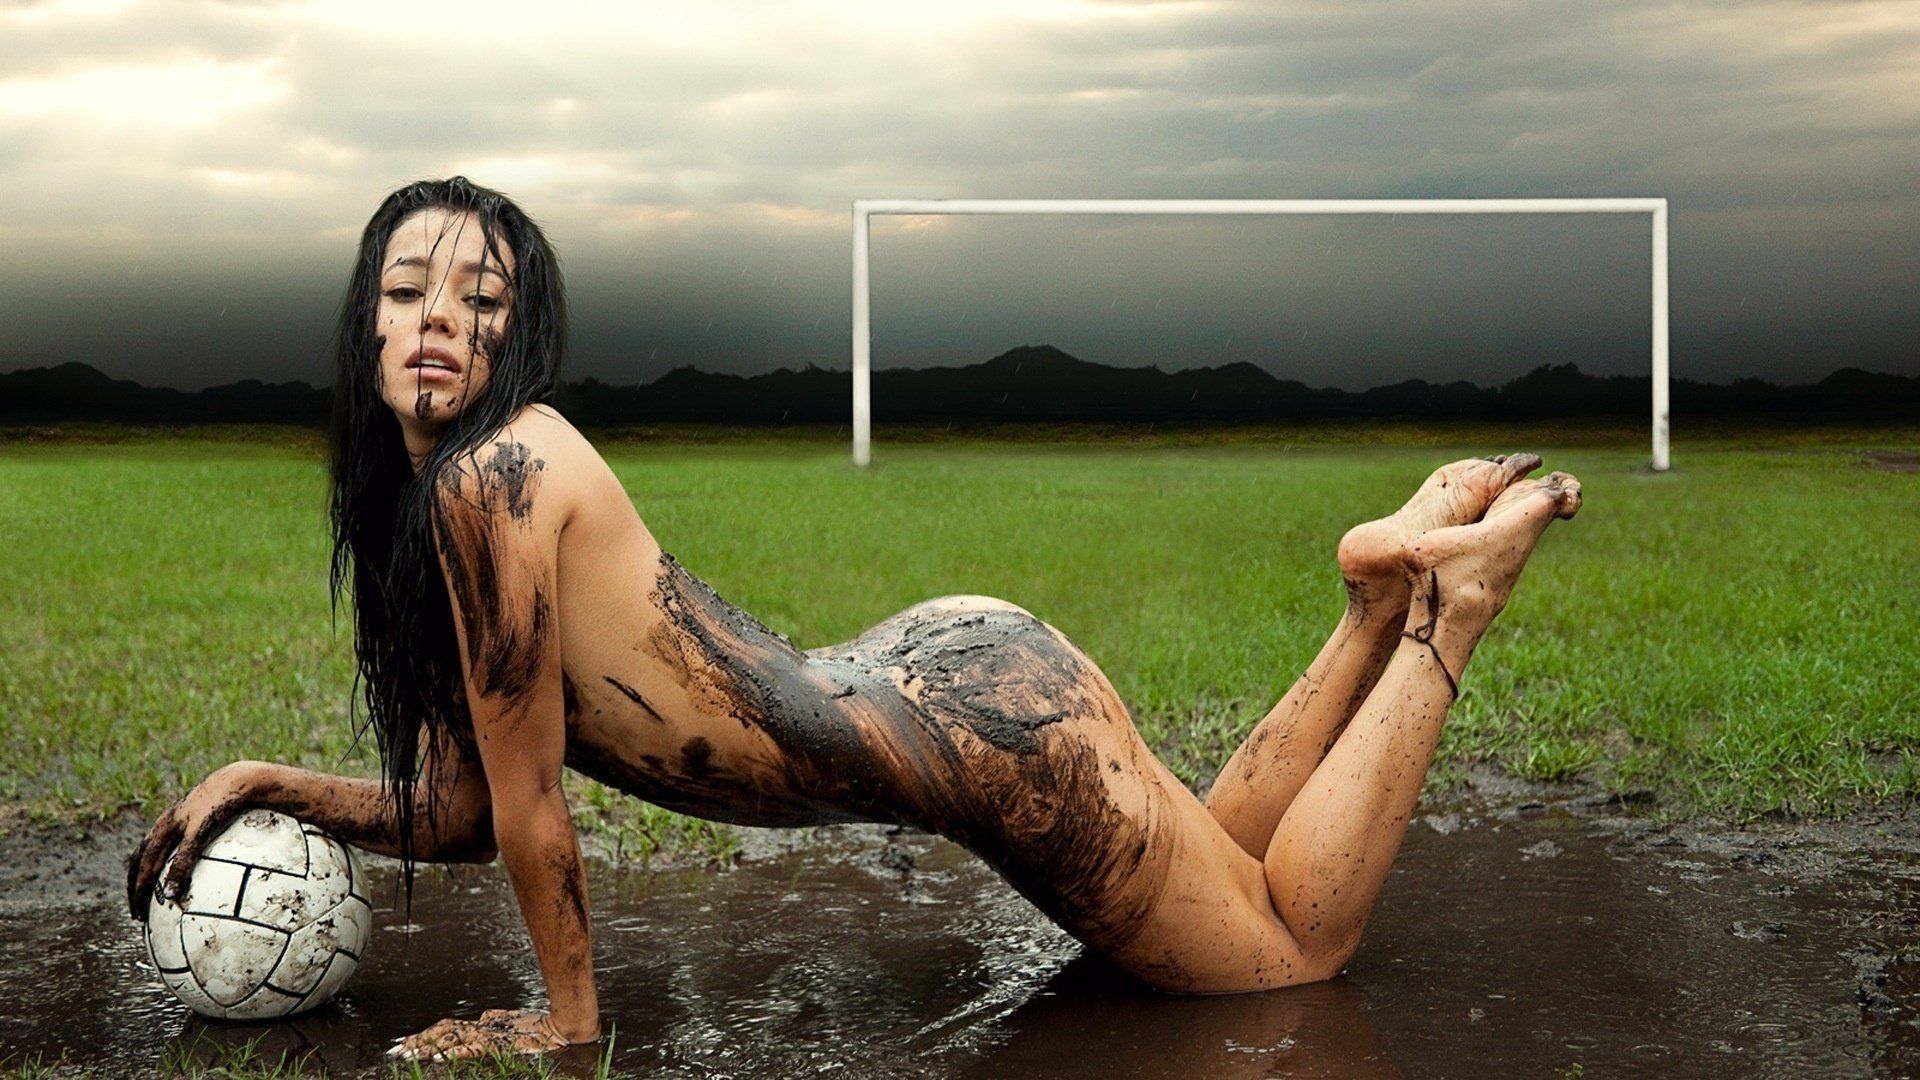 Videos and galleries of girls naked in mud